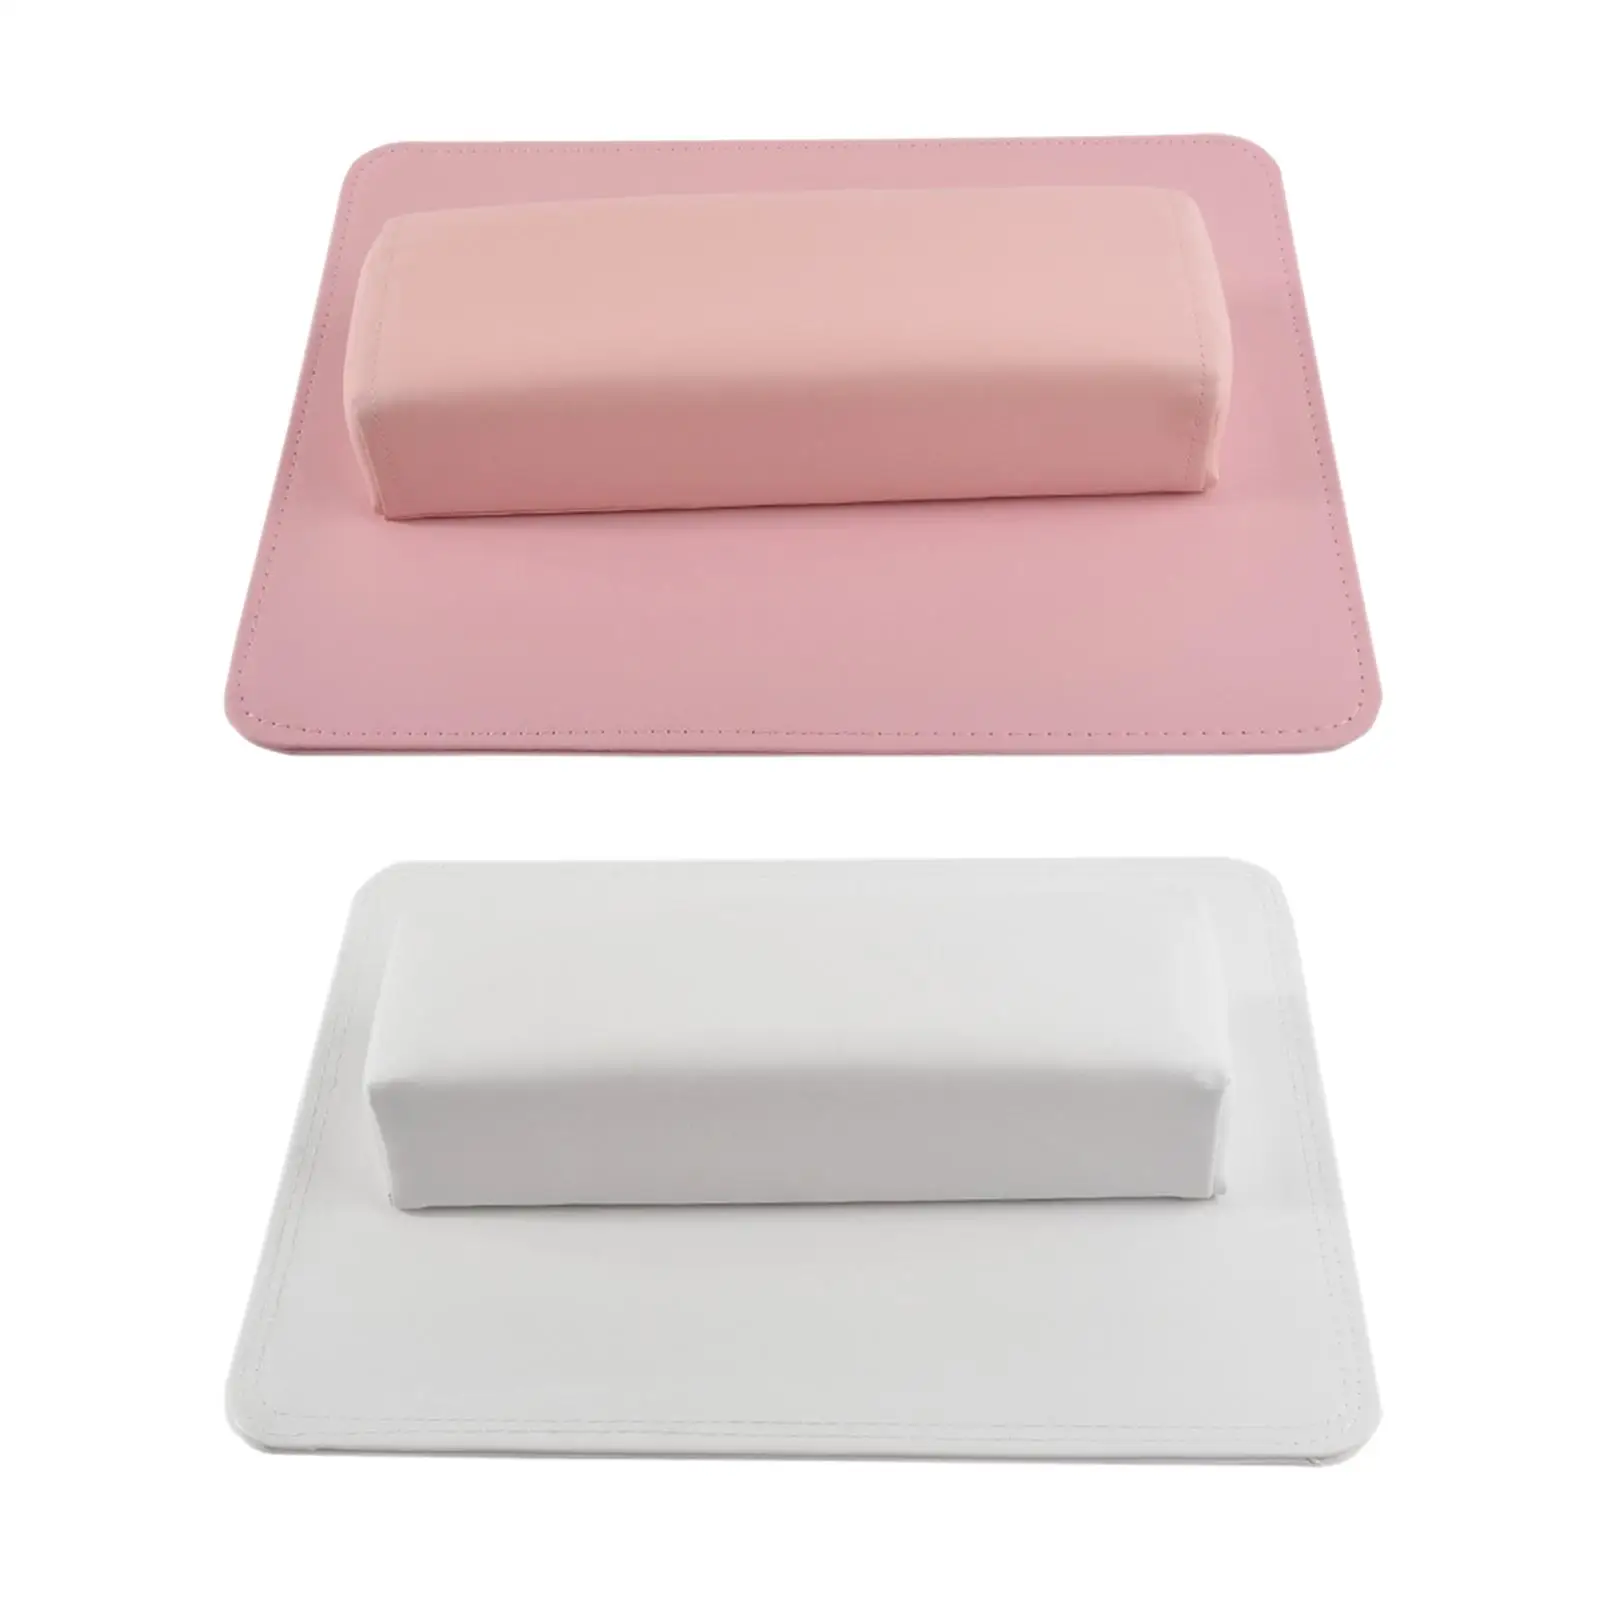 Nail Pillow and Mat PU Leather Comfortable Manicure Tool for Manicurist Home